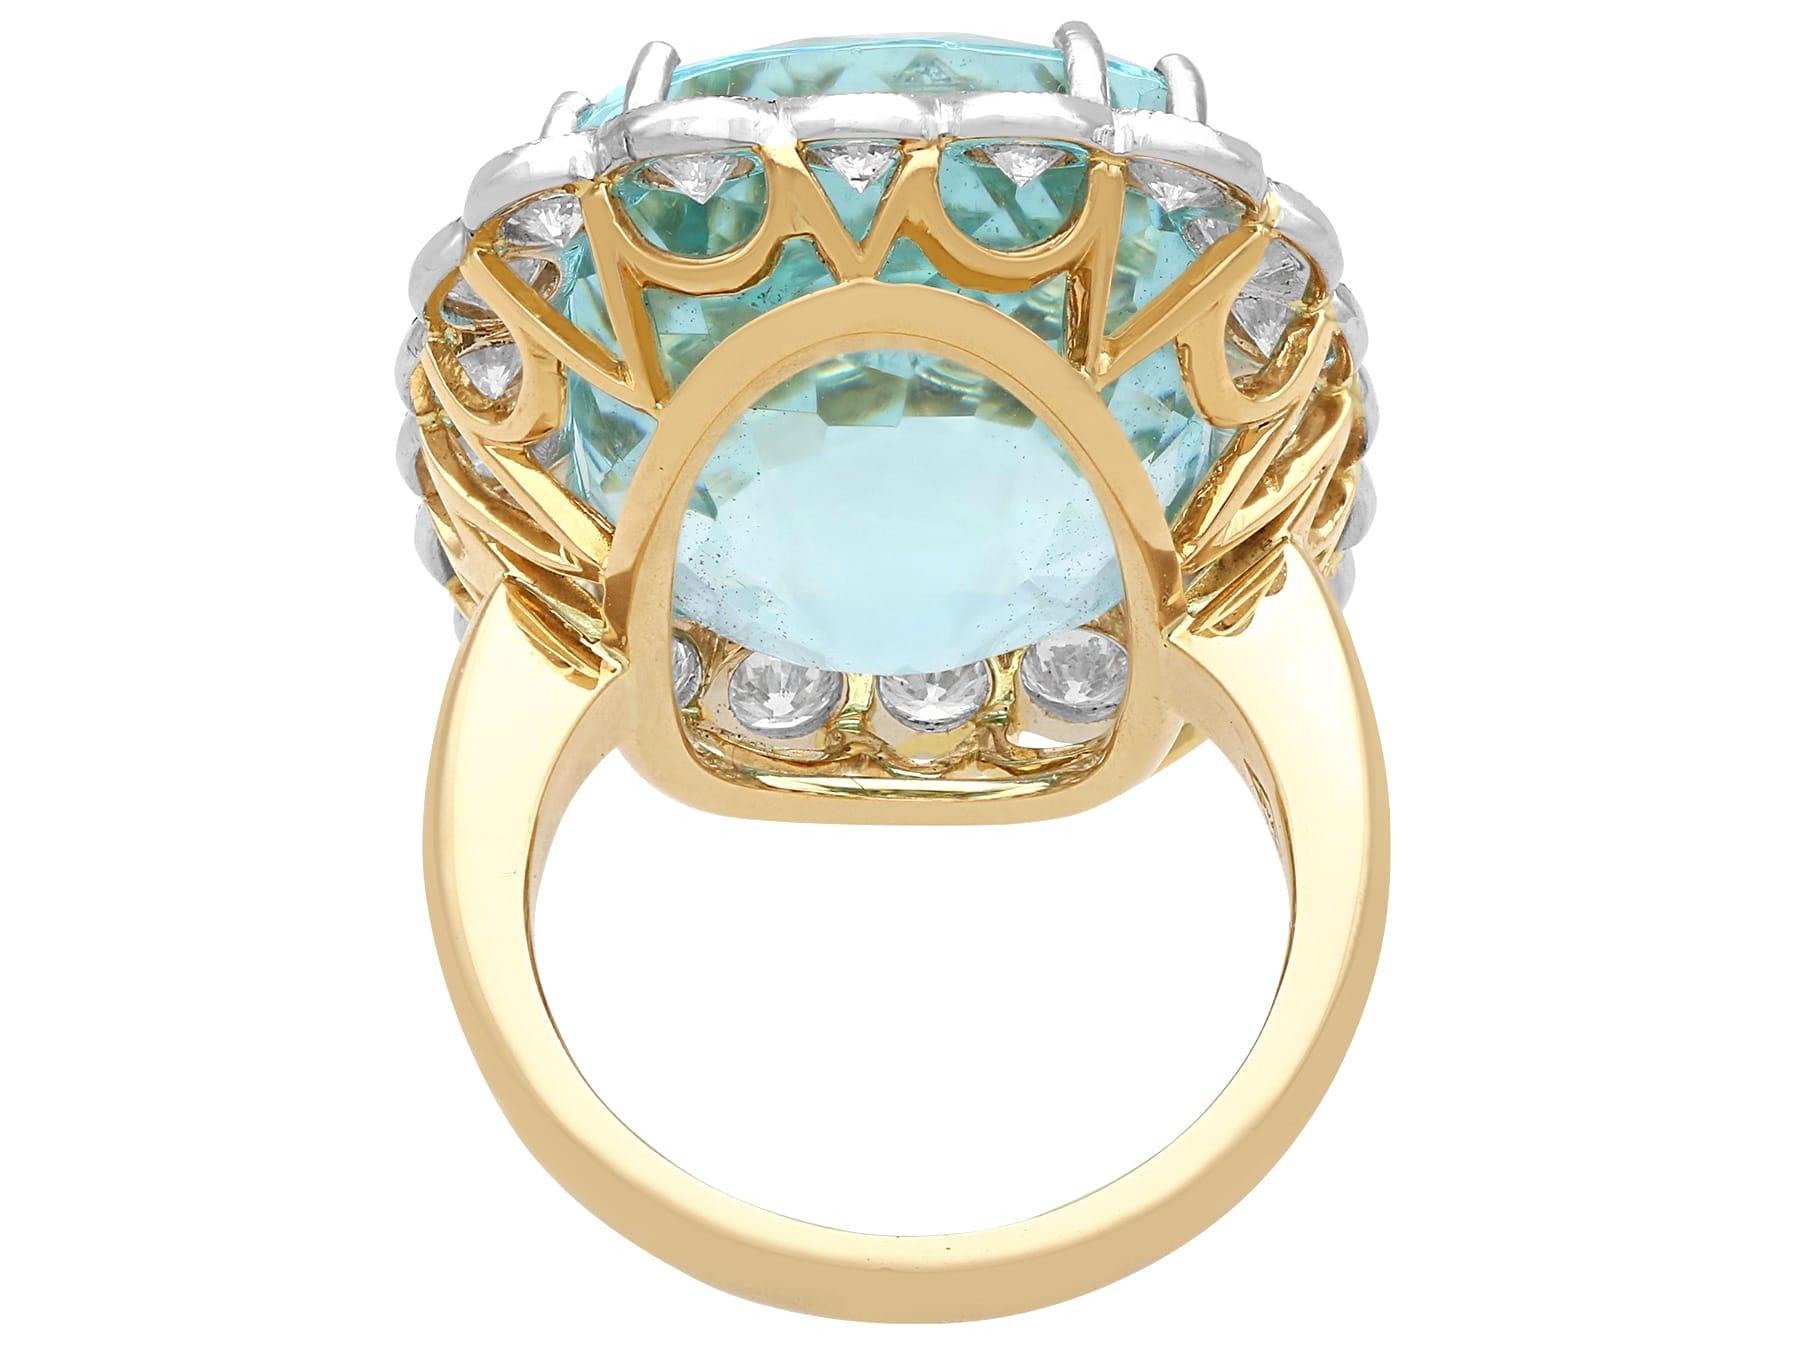 30.09 Carat Aquamarine and 2.94 Carat Diamond 18K Yellow Gold Dress Ring  In Excellent Condition For Sale In Jesmond, Newcastle Upon Tyne